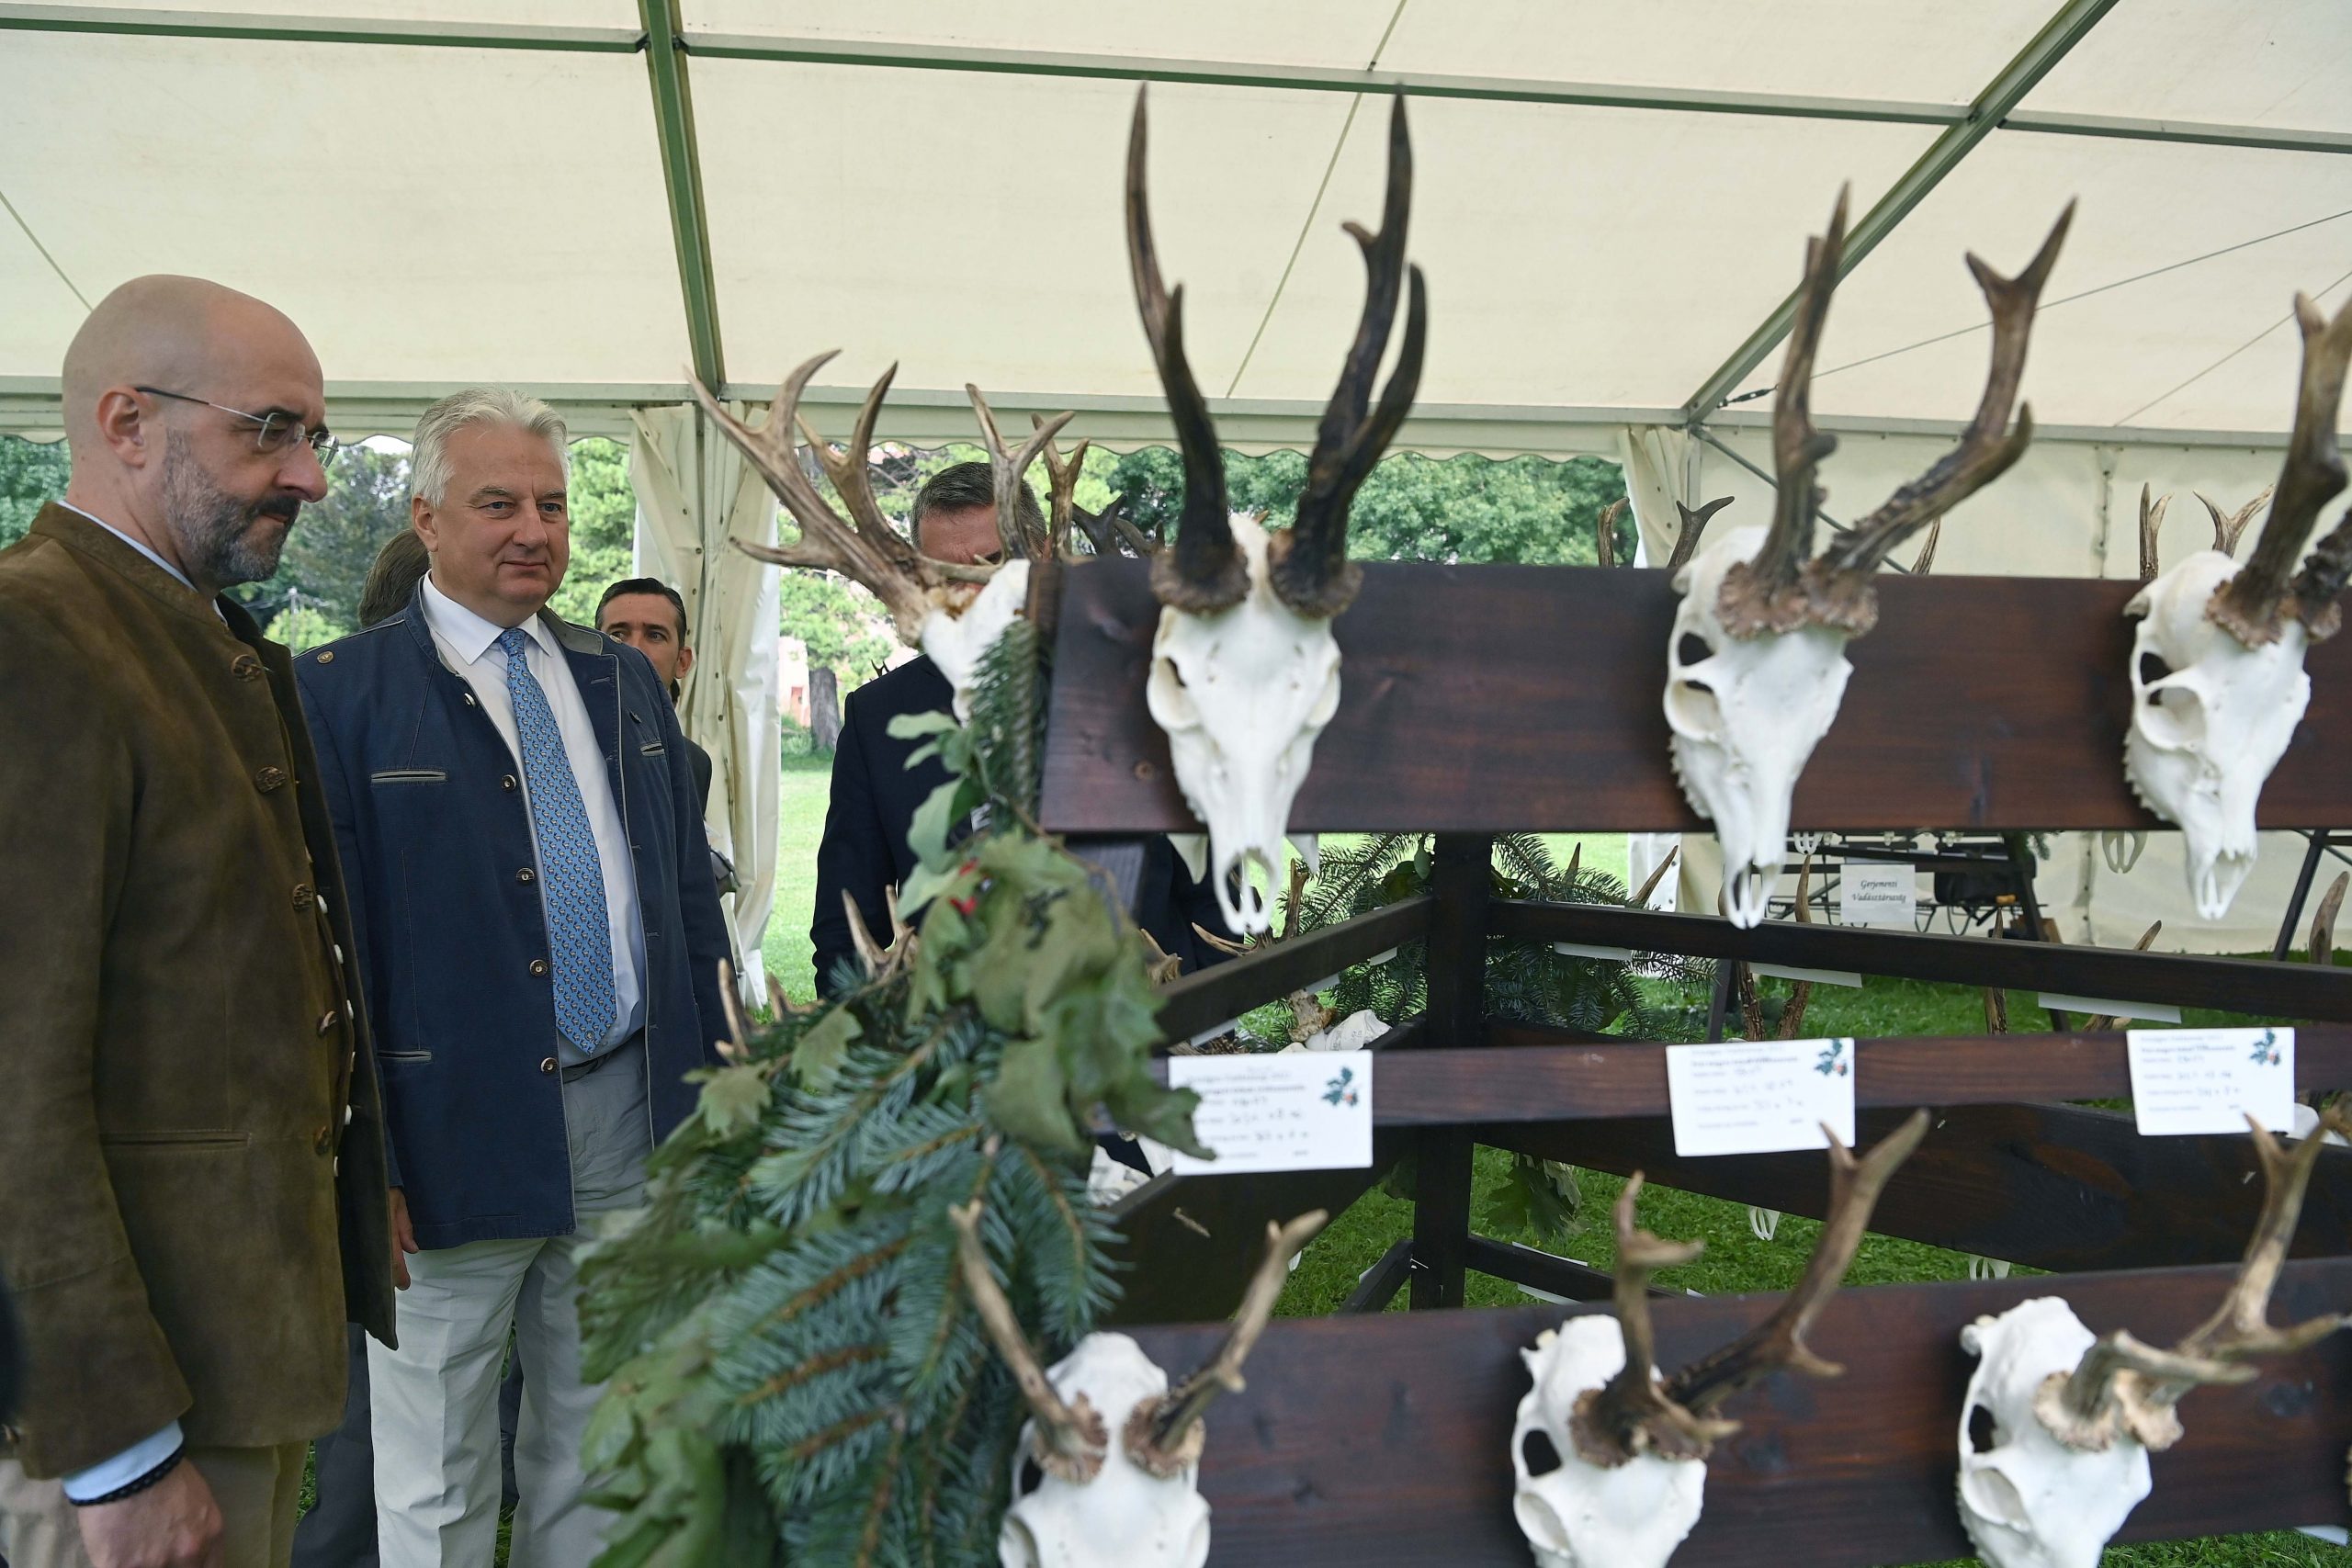 Deputy PM: Hunting Expo to Highlight Importance of Sustainable Hunting